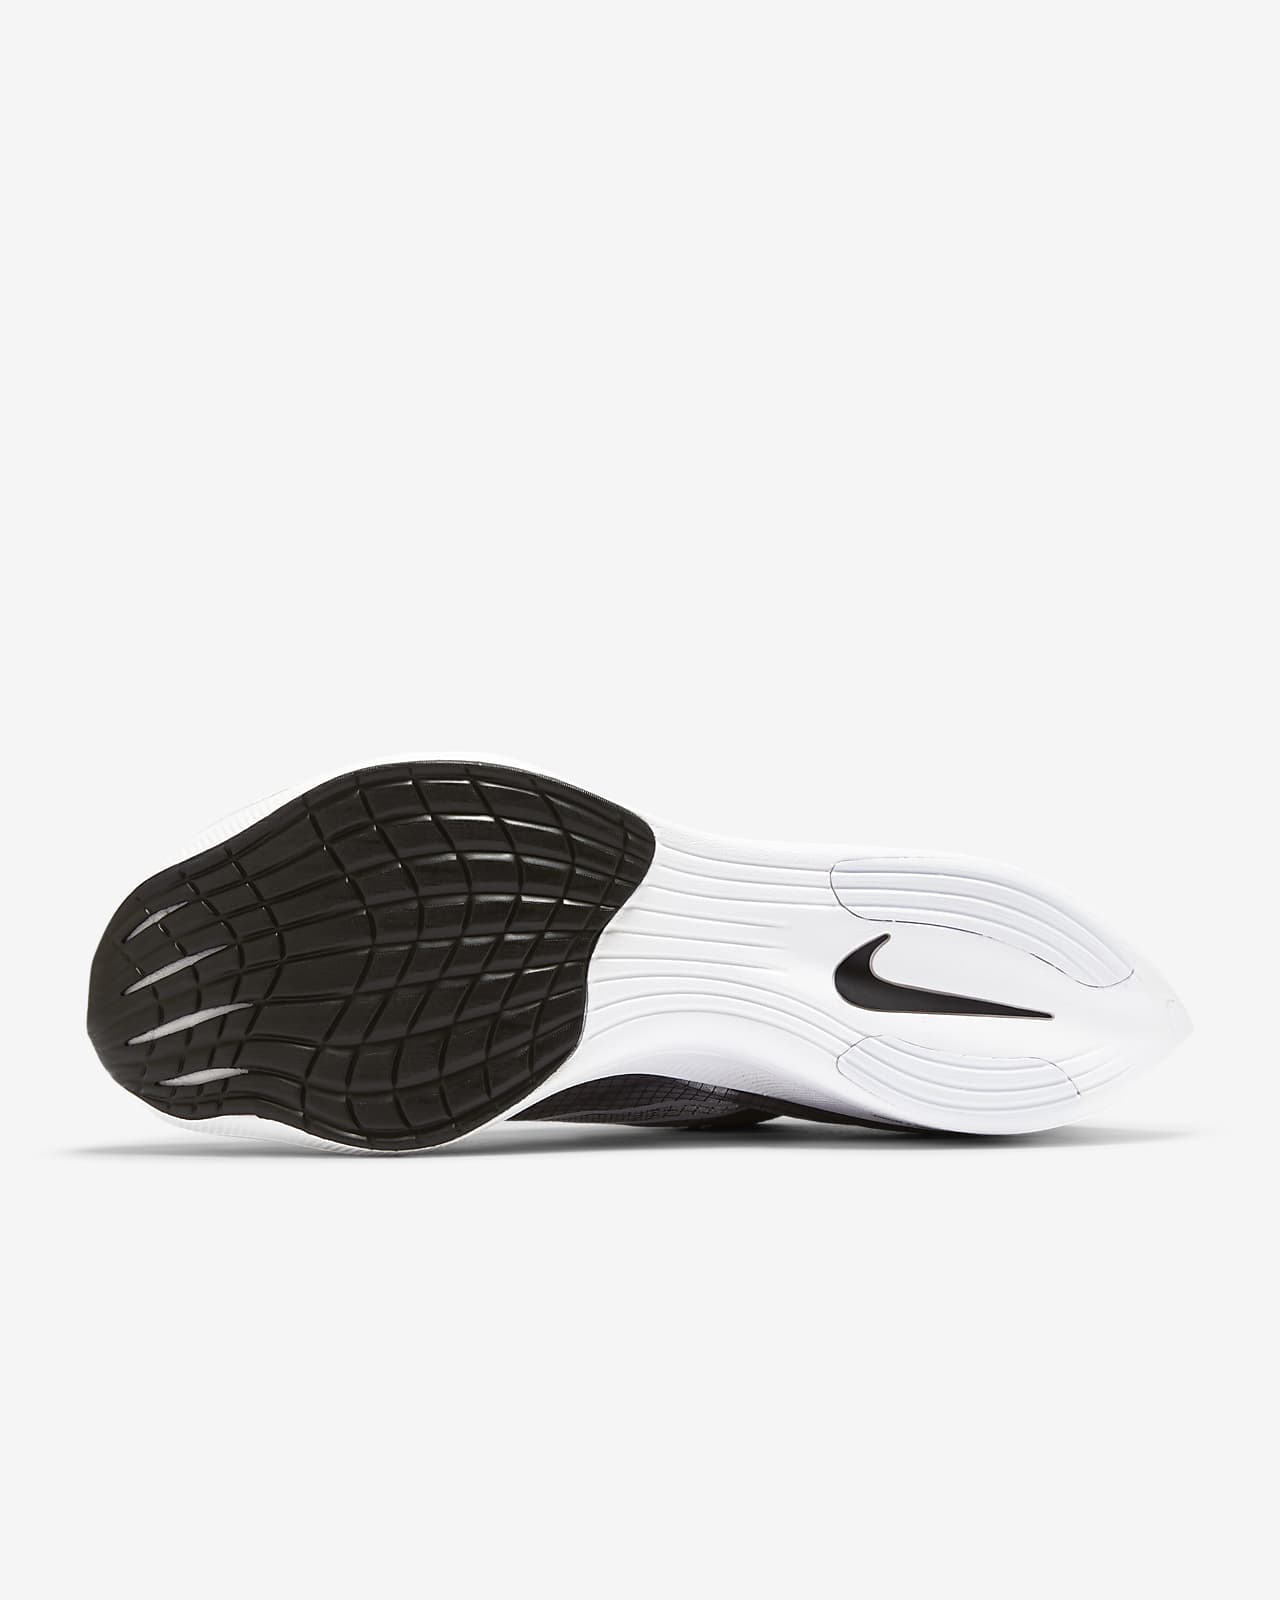 nike vaporfly running shoes for sale